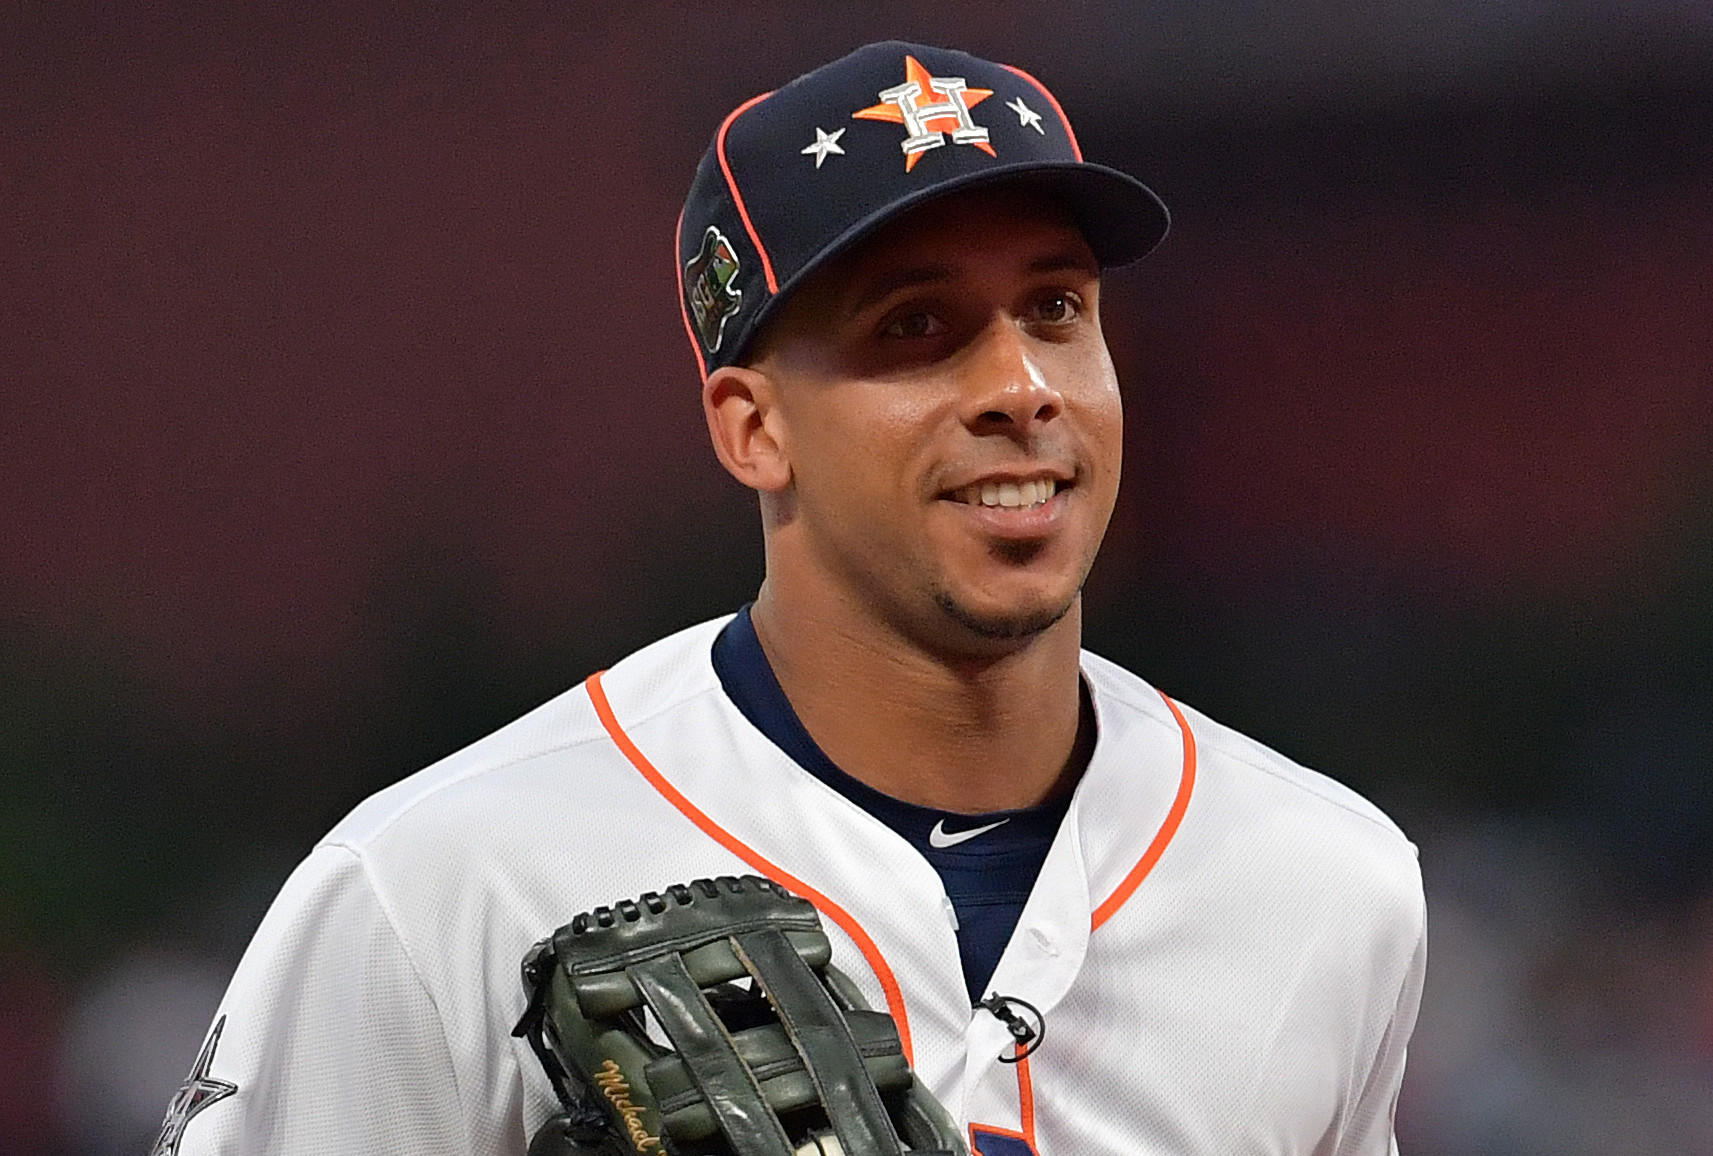 Report: Astros bring back Brantley on 1-year, $12M deal